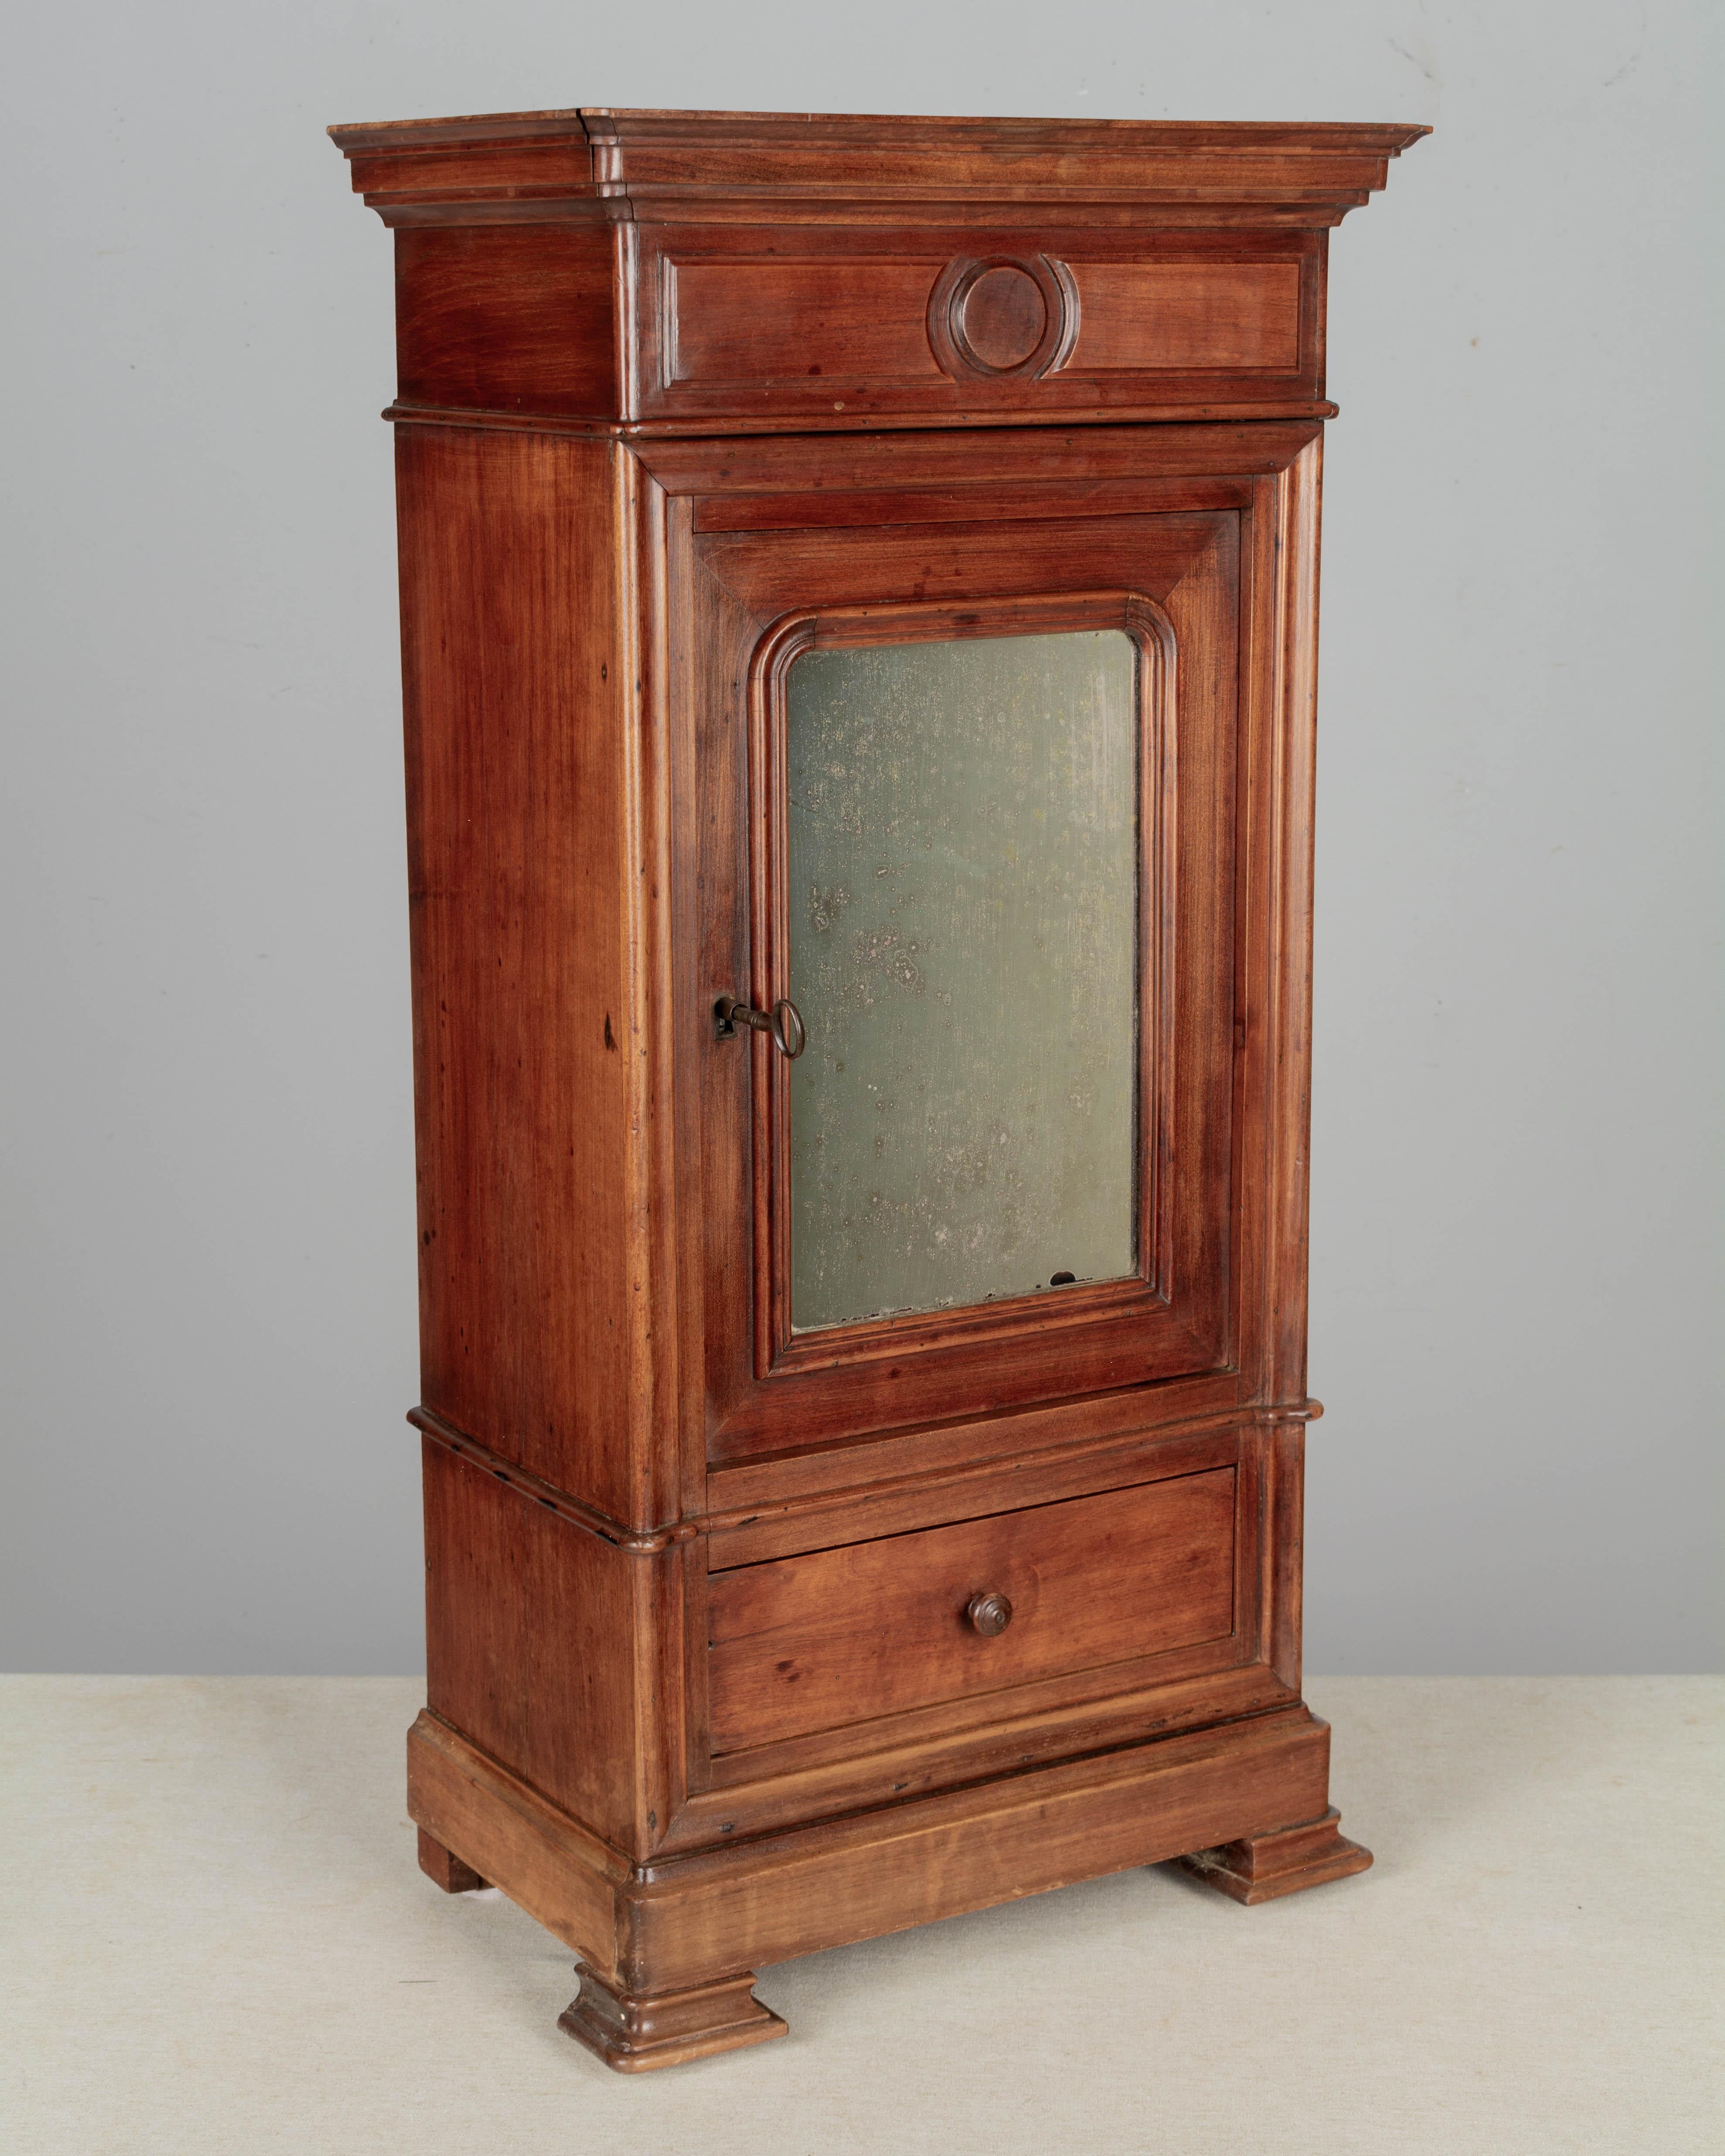 A 19th century Century French Louis Philippe style miniature armoire or sample cabinet, hand-crafted of solid walnut with a mirrored door and dovetailed drawer. Interior has one adjustable shelf (replaced). Working lock and key. Chestnut as a